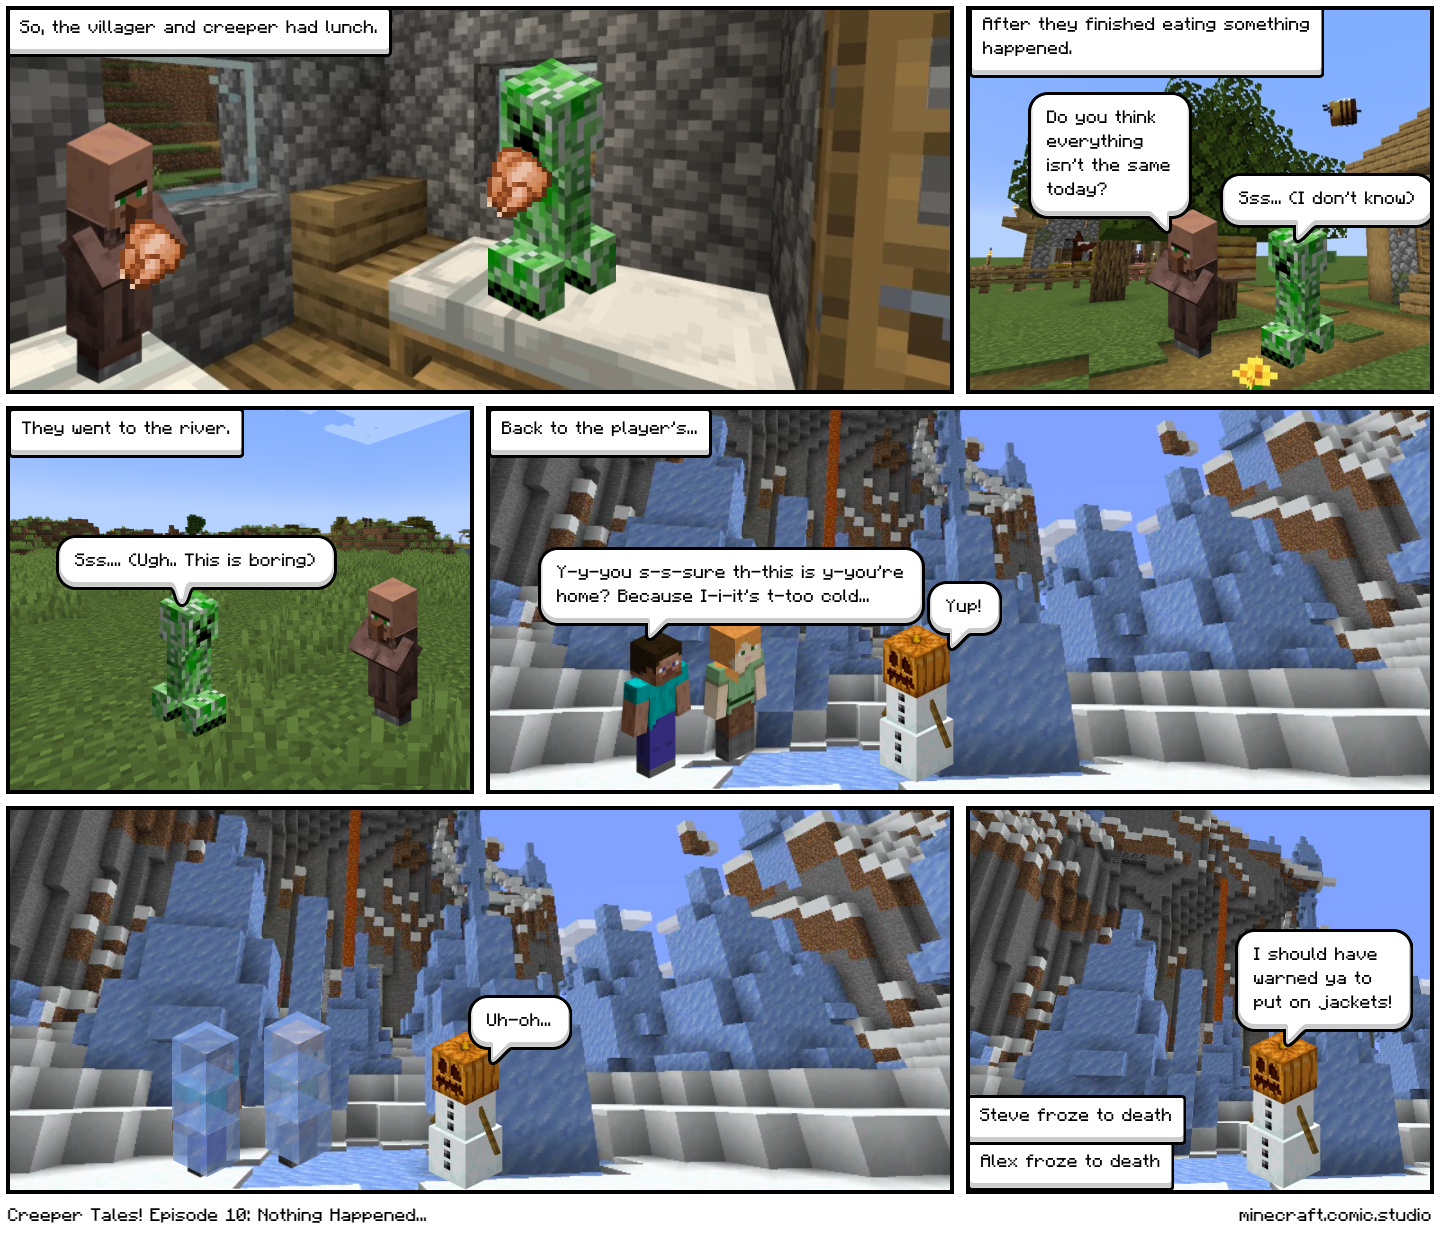 Creeper Tales! Episode 10: Nothing Happened...